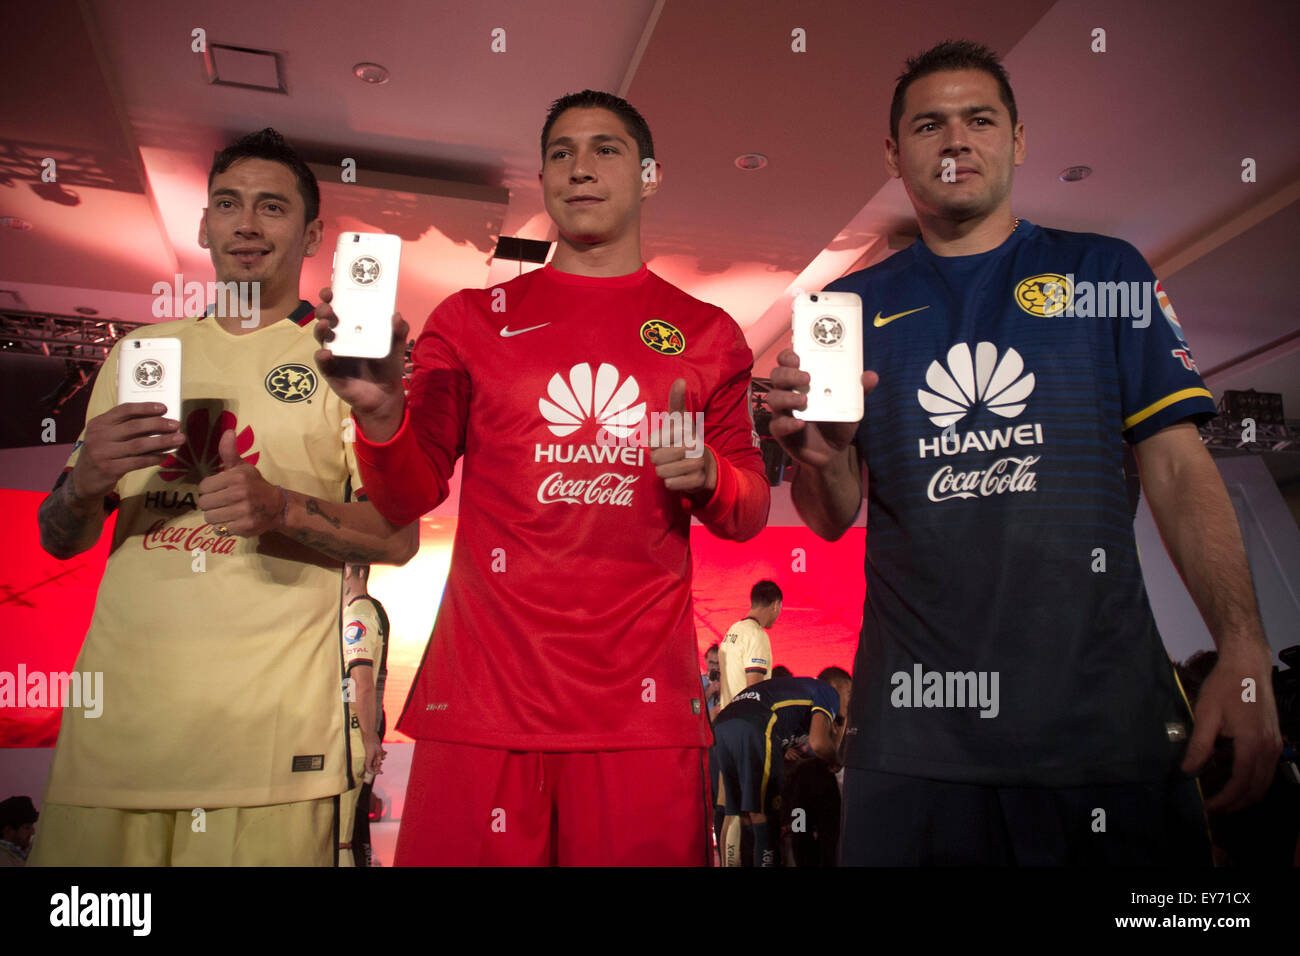 Mexico City, Mexico. 22nd July, 2015. Players Rubens Sambueza (L), Hugo Gonzalez (C) and Pablo Aguilar(R) of America Football Club, participate during the presentation of the new sponsor of America Football Club, the Chinese telecommunications enterprise, Huawei, in Mexico City, capital of Mexico, on July 22, 2015. America Football Club, introduced their new jersey on Wednesday with the sponsor of the Chinese telecommunications enterprise, Huawei. Credit:  Alejandro Ayala/Xinhua/Alamy Live News Stock Photo